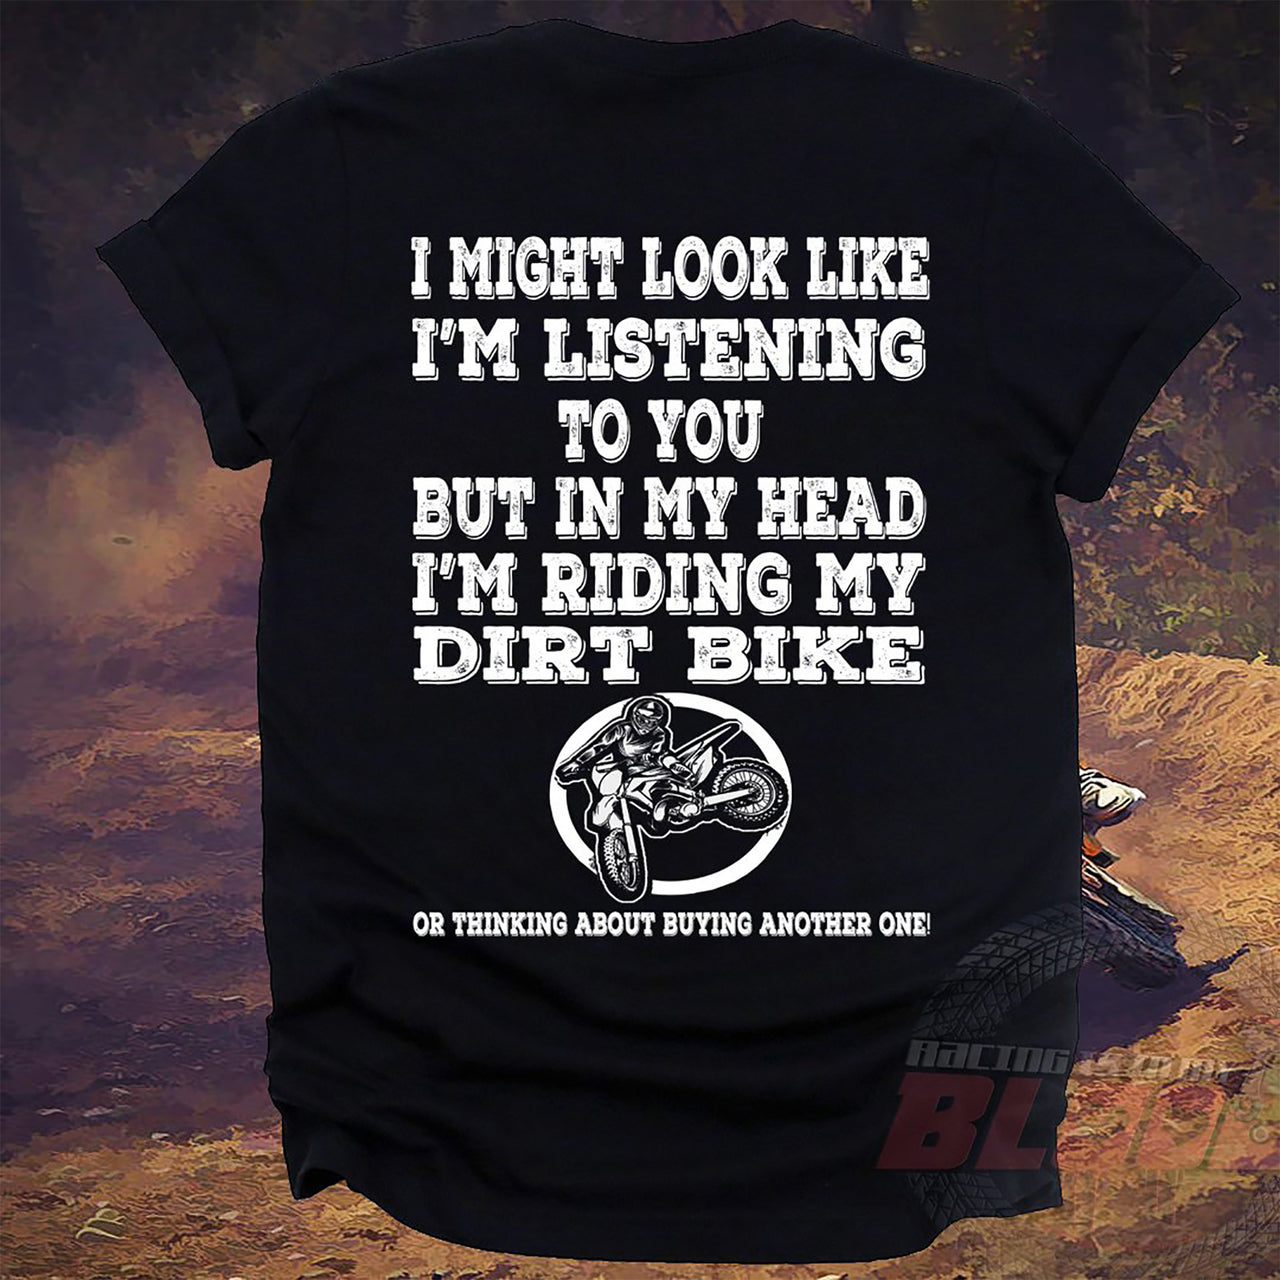 I Might look Like I'm Listening To You But In My Head I'm Riding My Dirt Bike T-Shirts